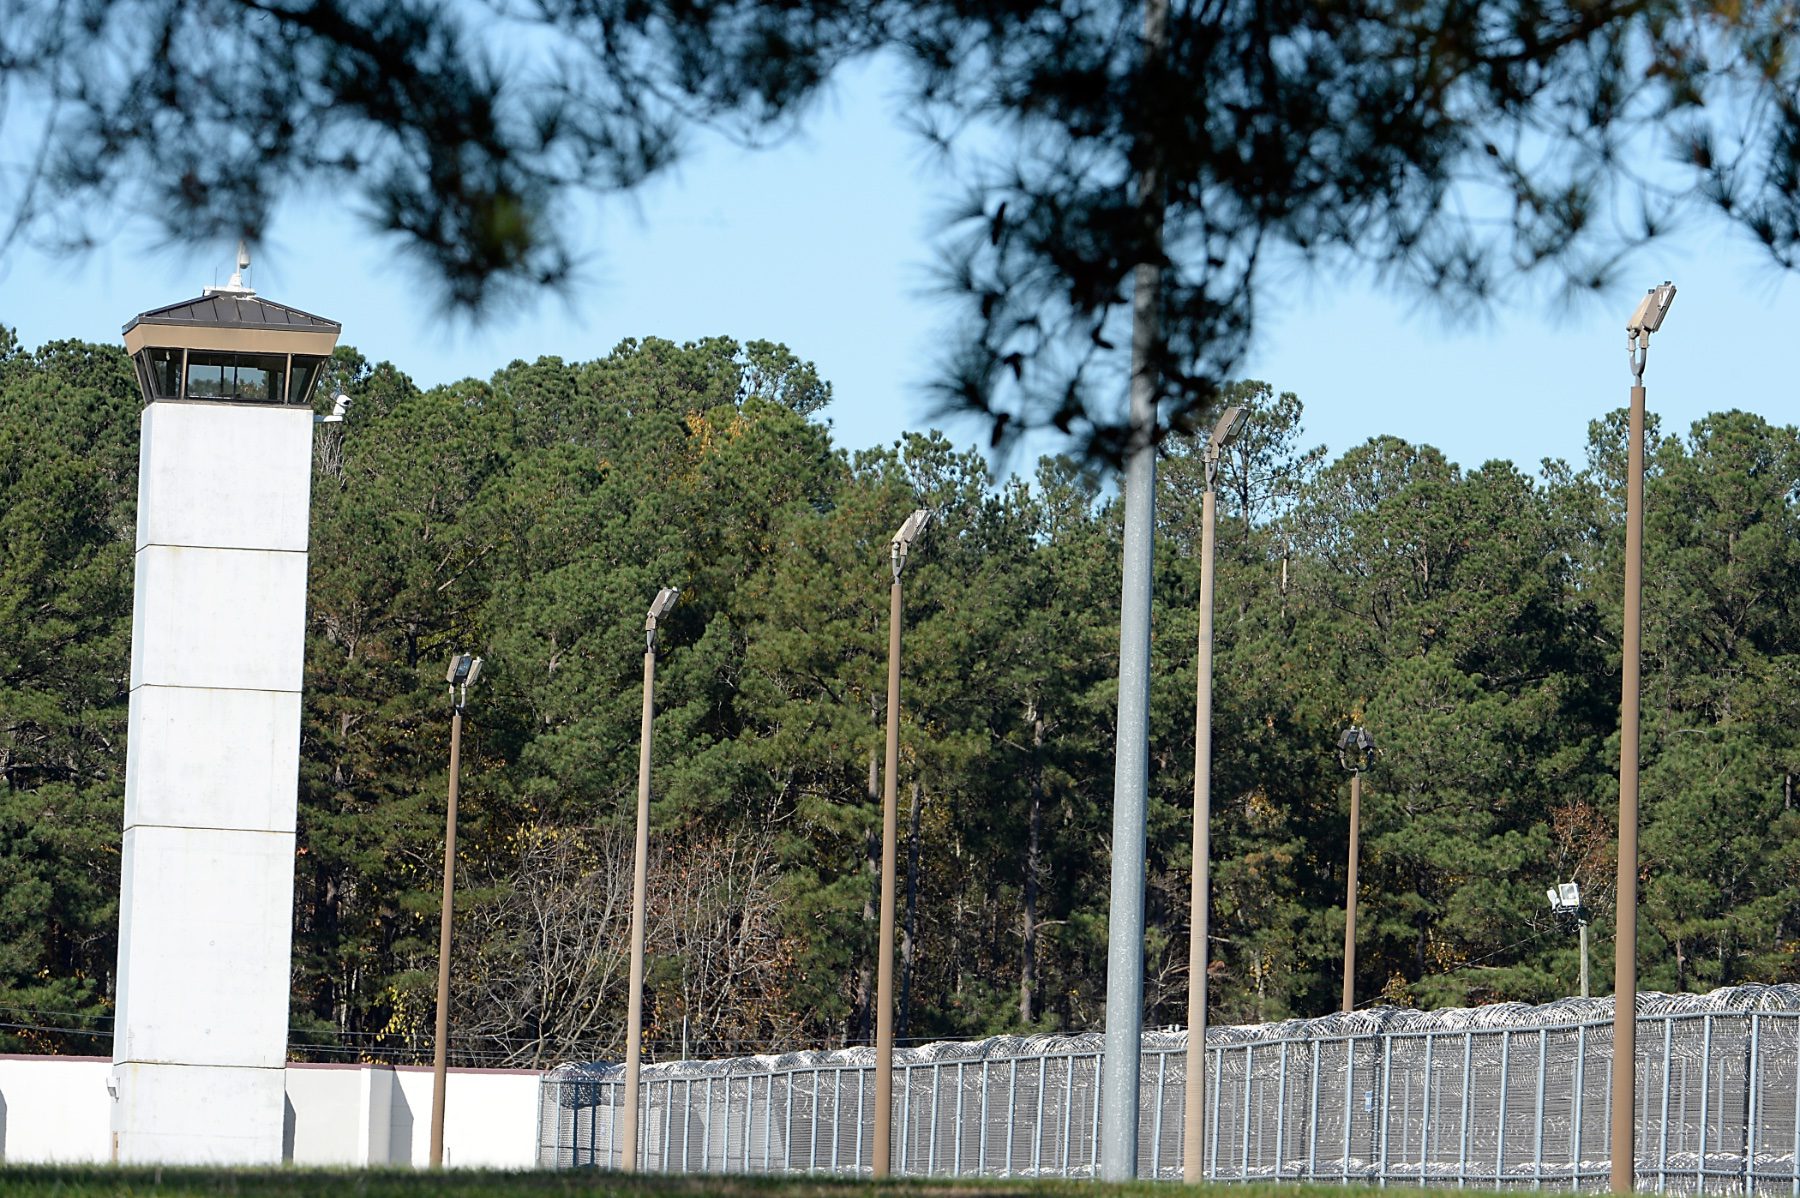 The outside of the federal prison in Butner, North Carolina.